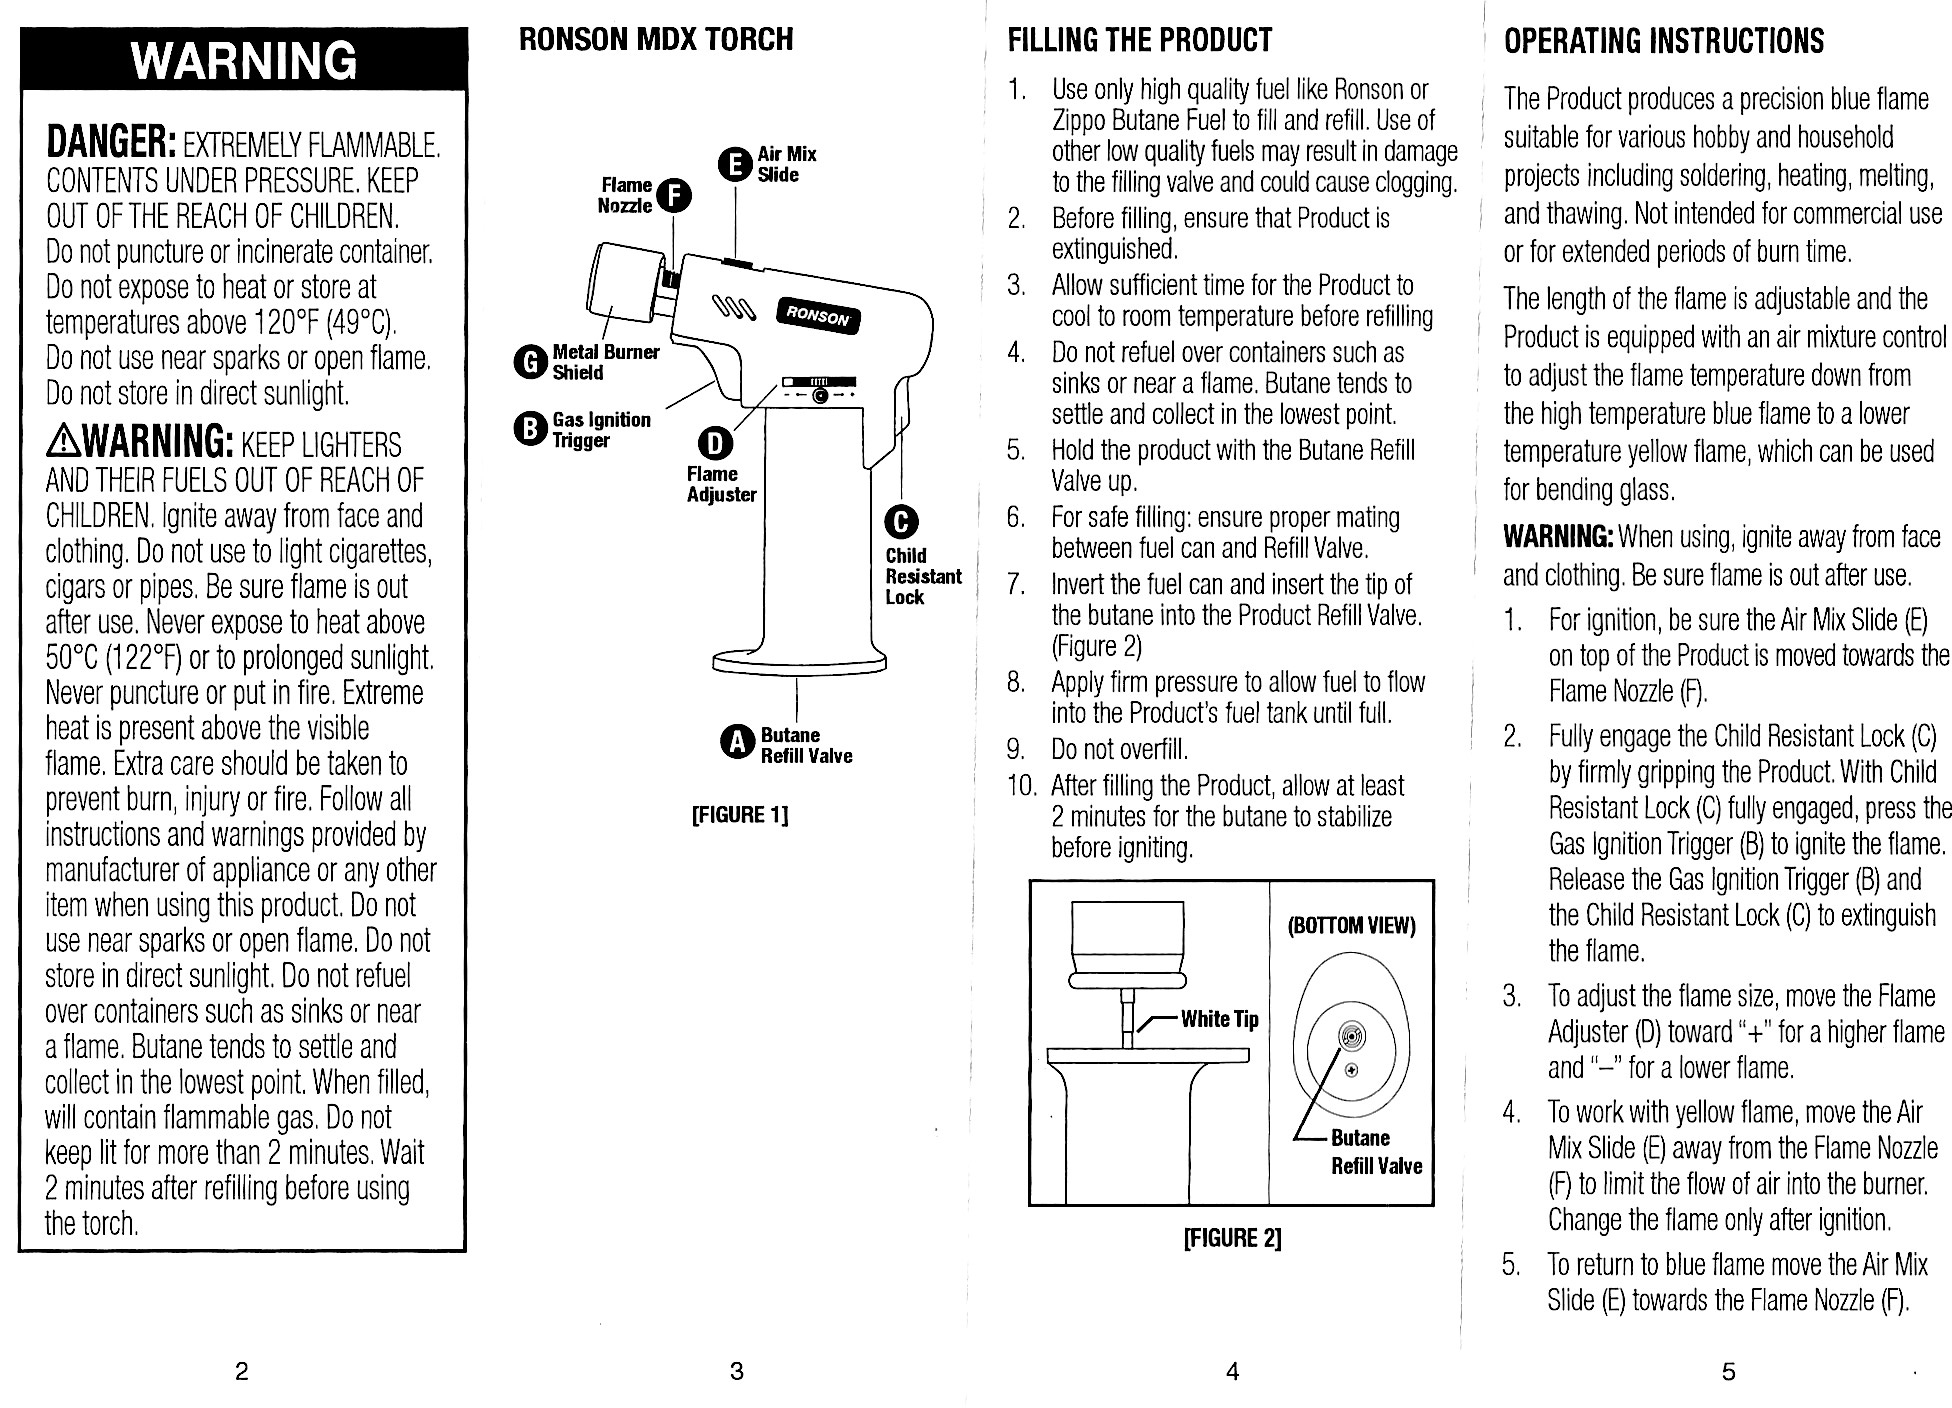 Ronson MDX Torch instructions pg 2